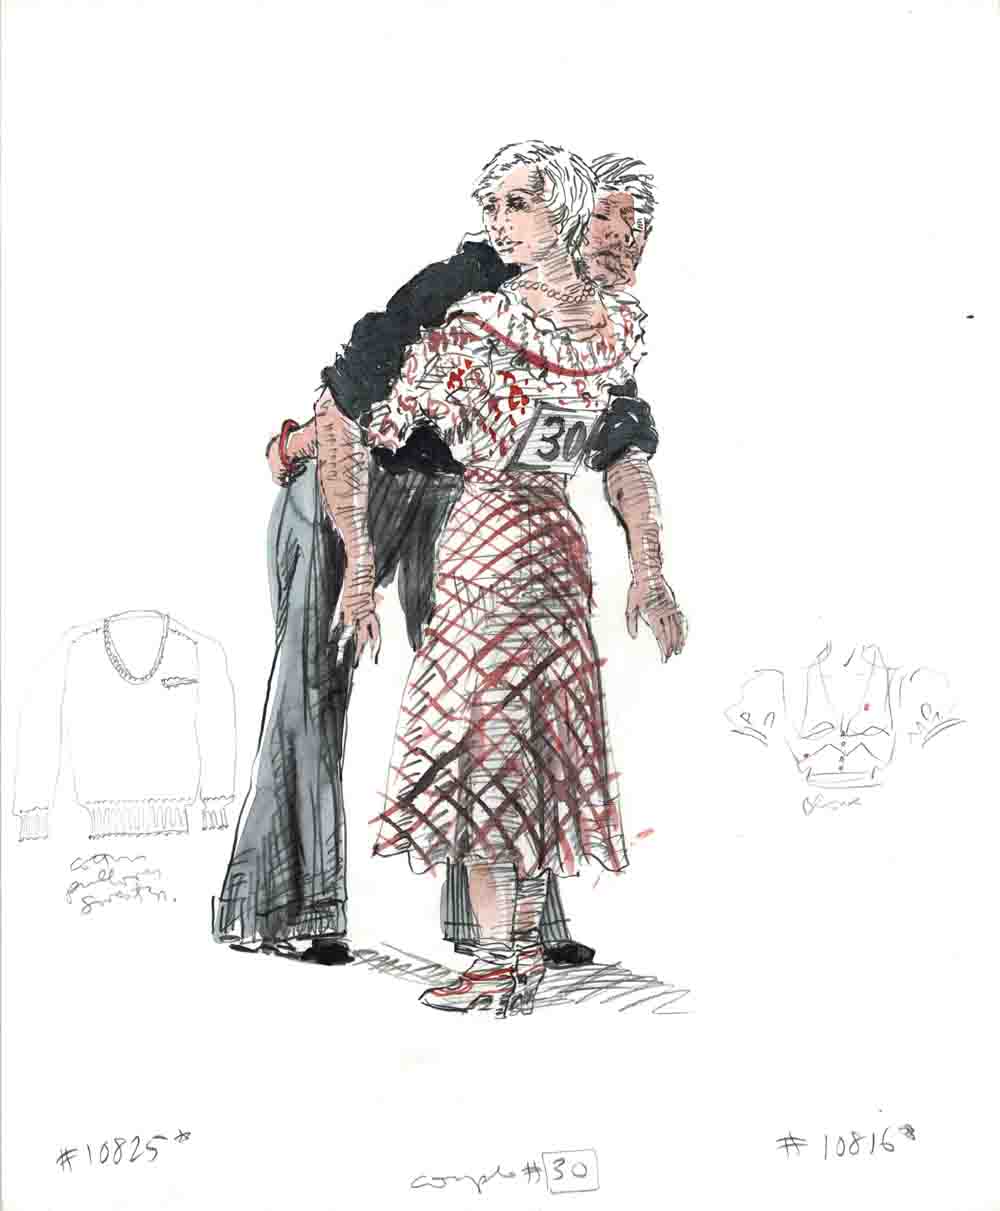 Sketch for John McInnis and Ida Gilliams as Couple 42 after drawings by Reginald Marsh, Steel Pier, Graphite/ Watercolor/ Gouache/ Colored pencil on Bristol board, 14 x 17 inches